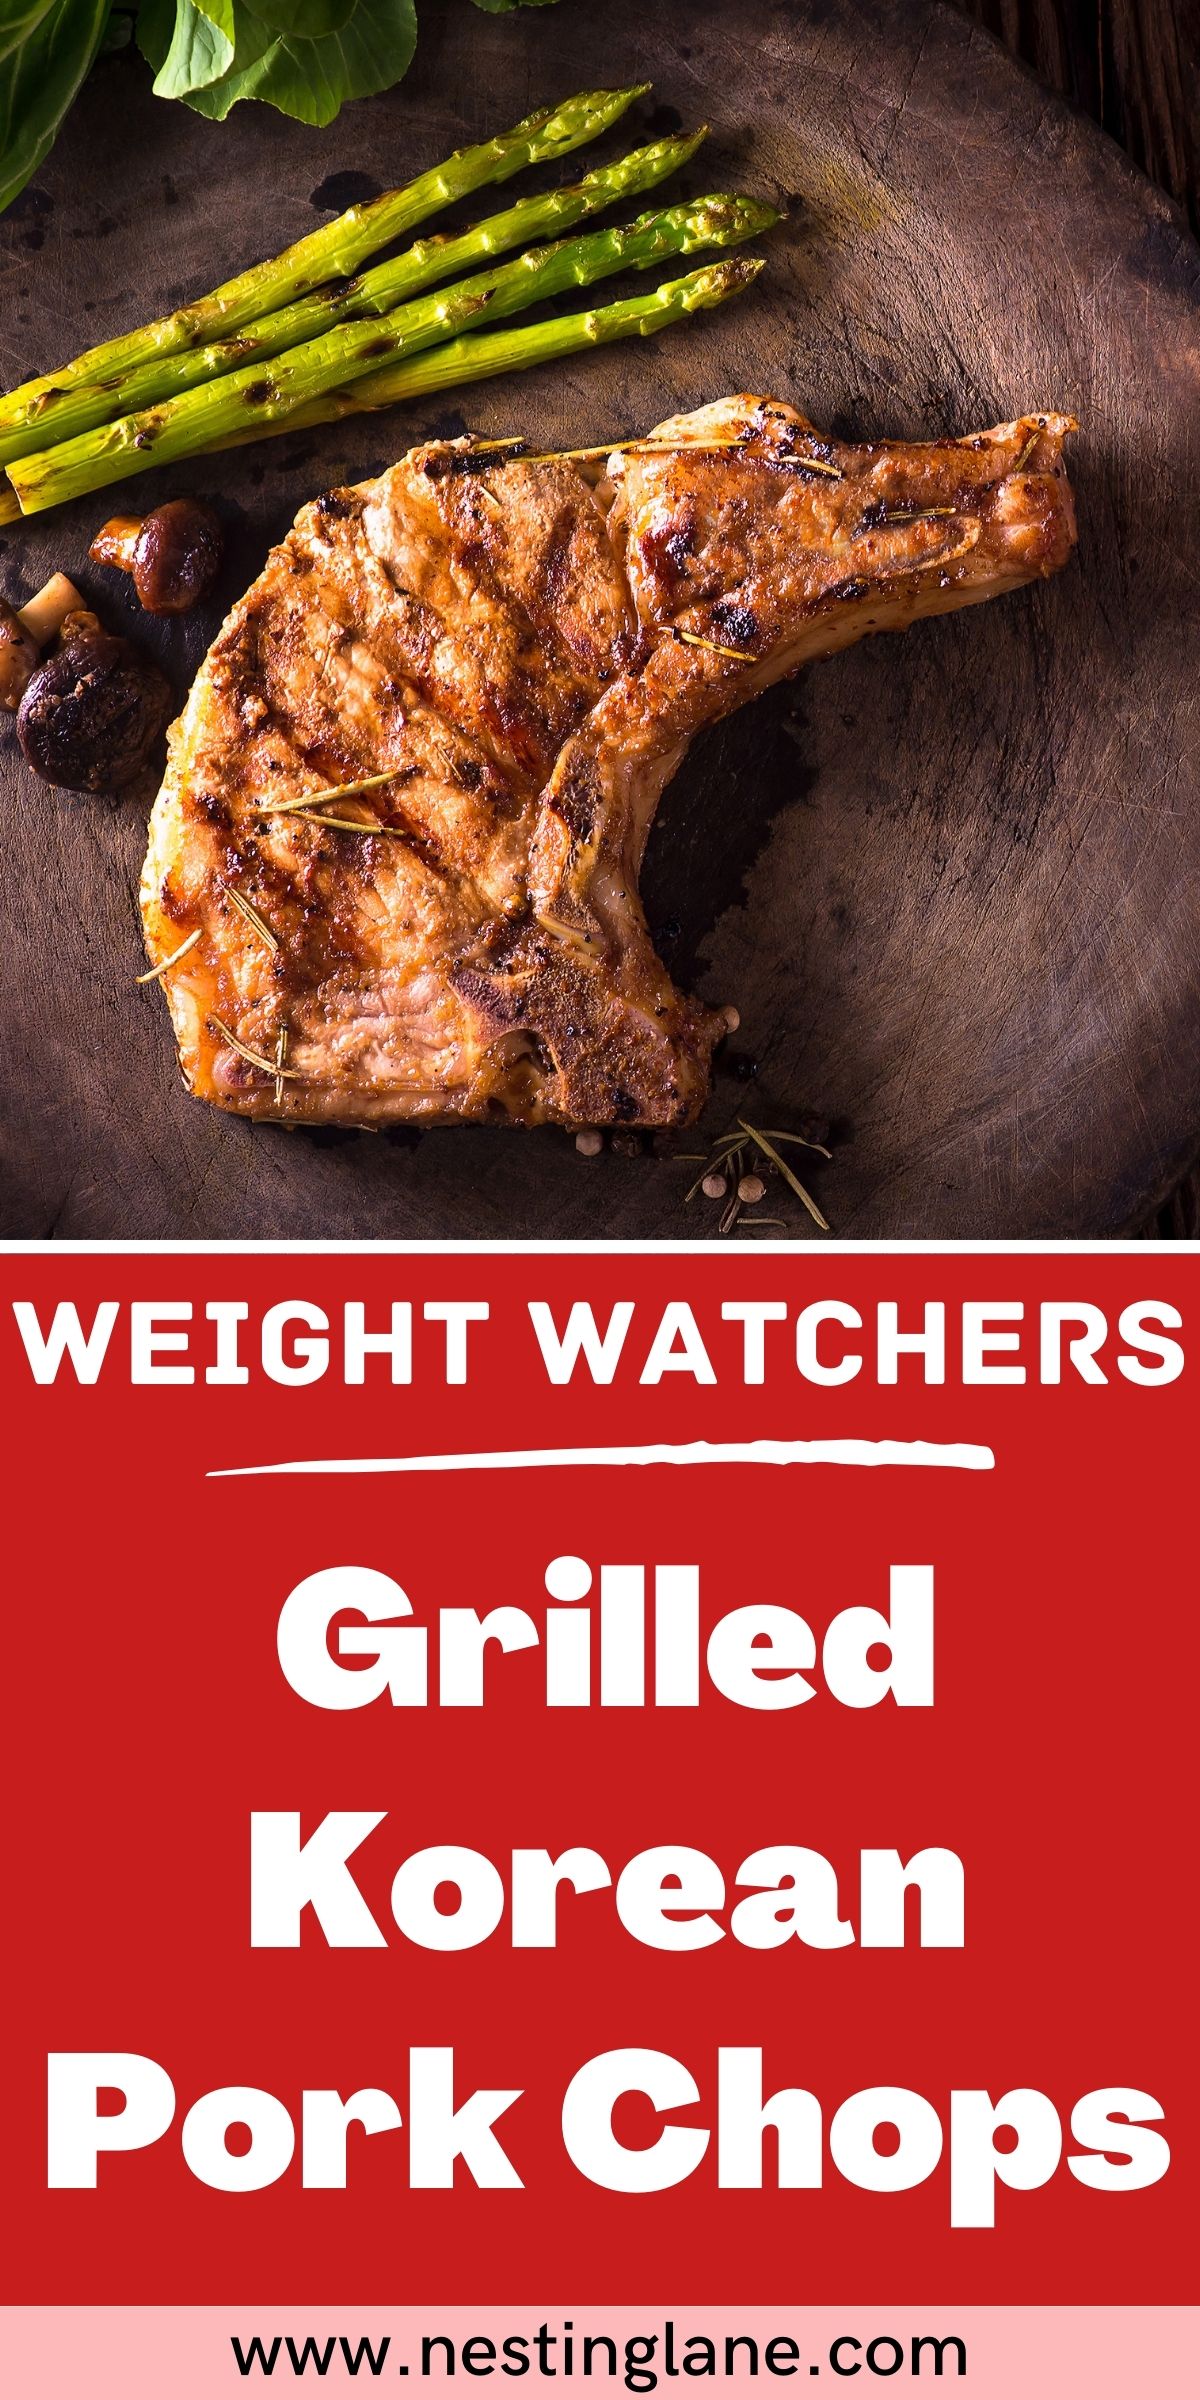 Graphic for Pinterest of Weight Watchers Grilled Korean Pork Chops Recipe.